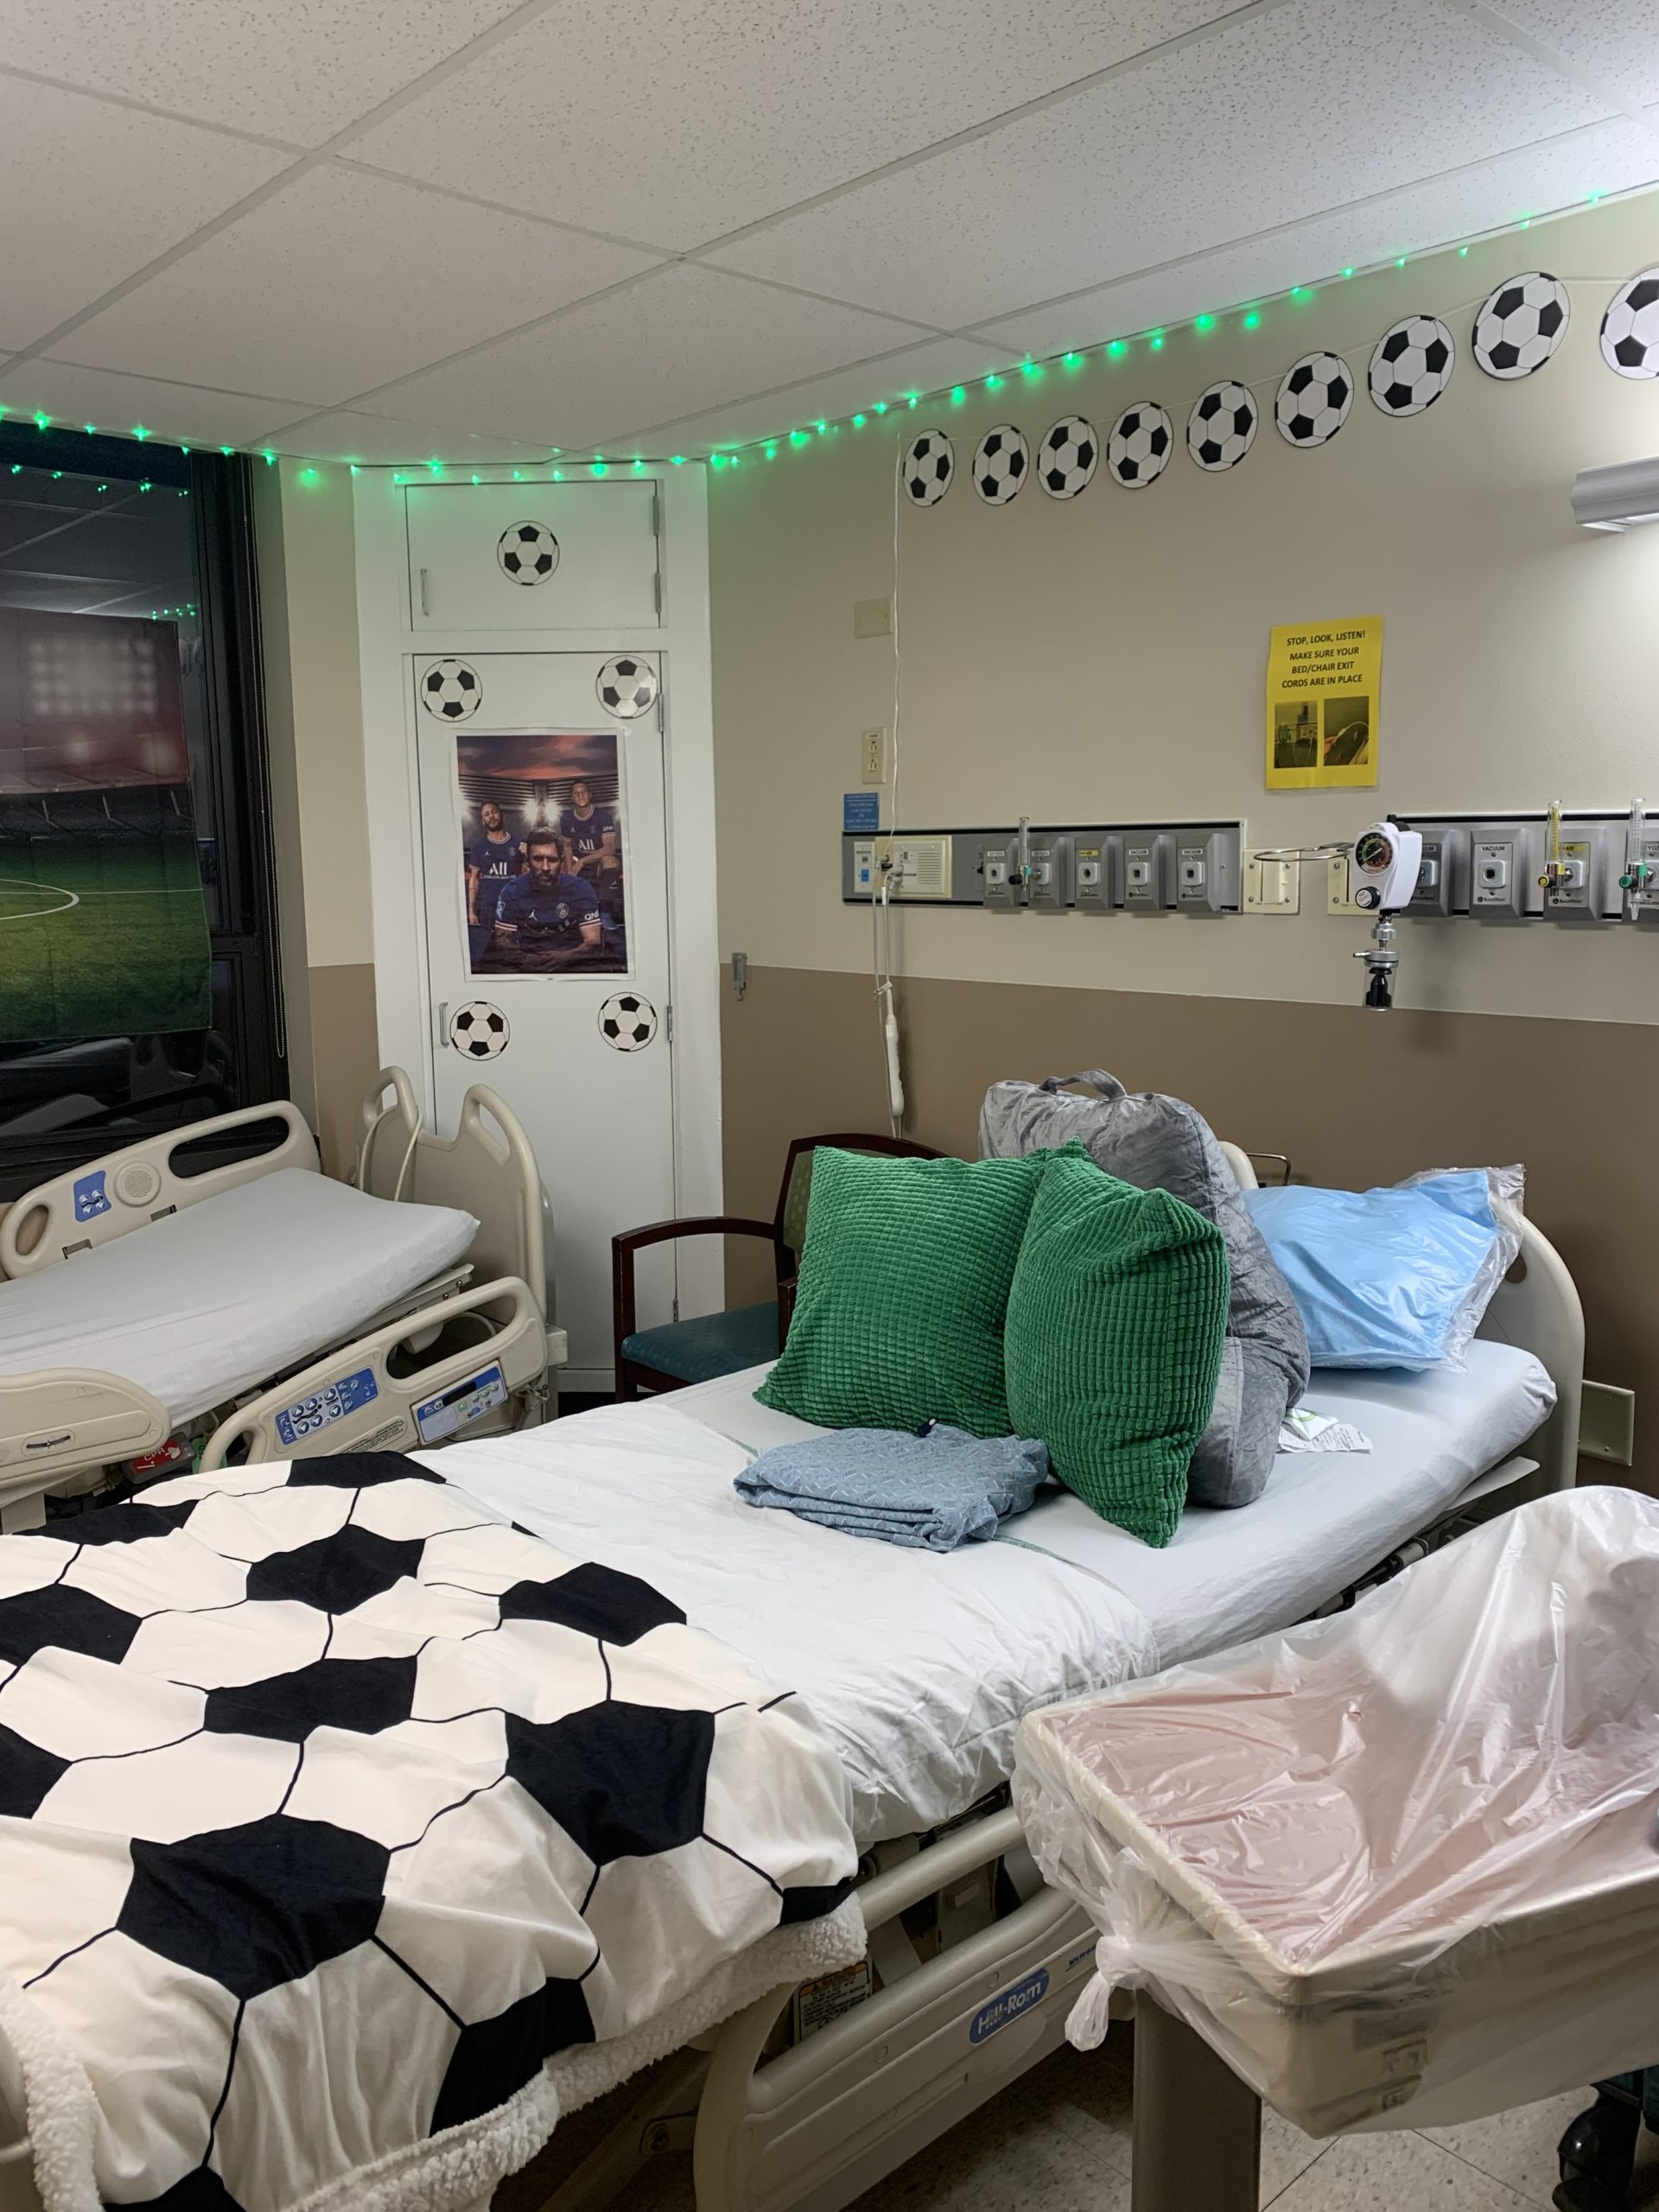 A hospital bed with a soccer ball quilt and two green pillows